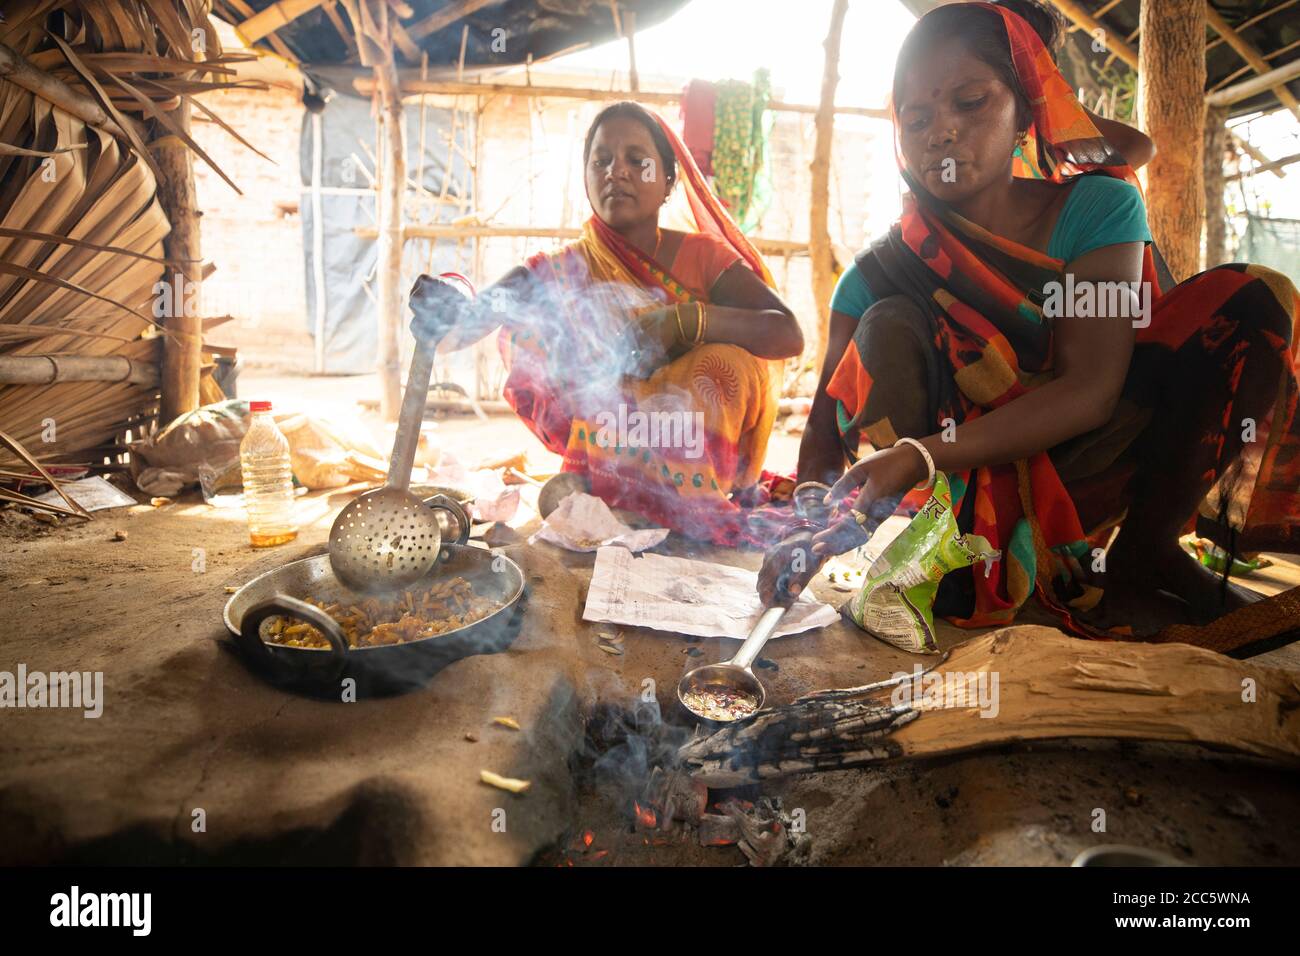 Two women cook a meal together in their village in Bihar, India. Stock Photo